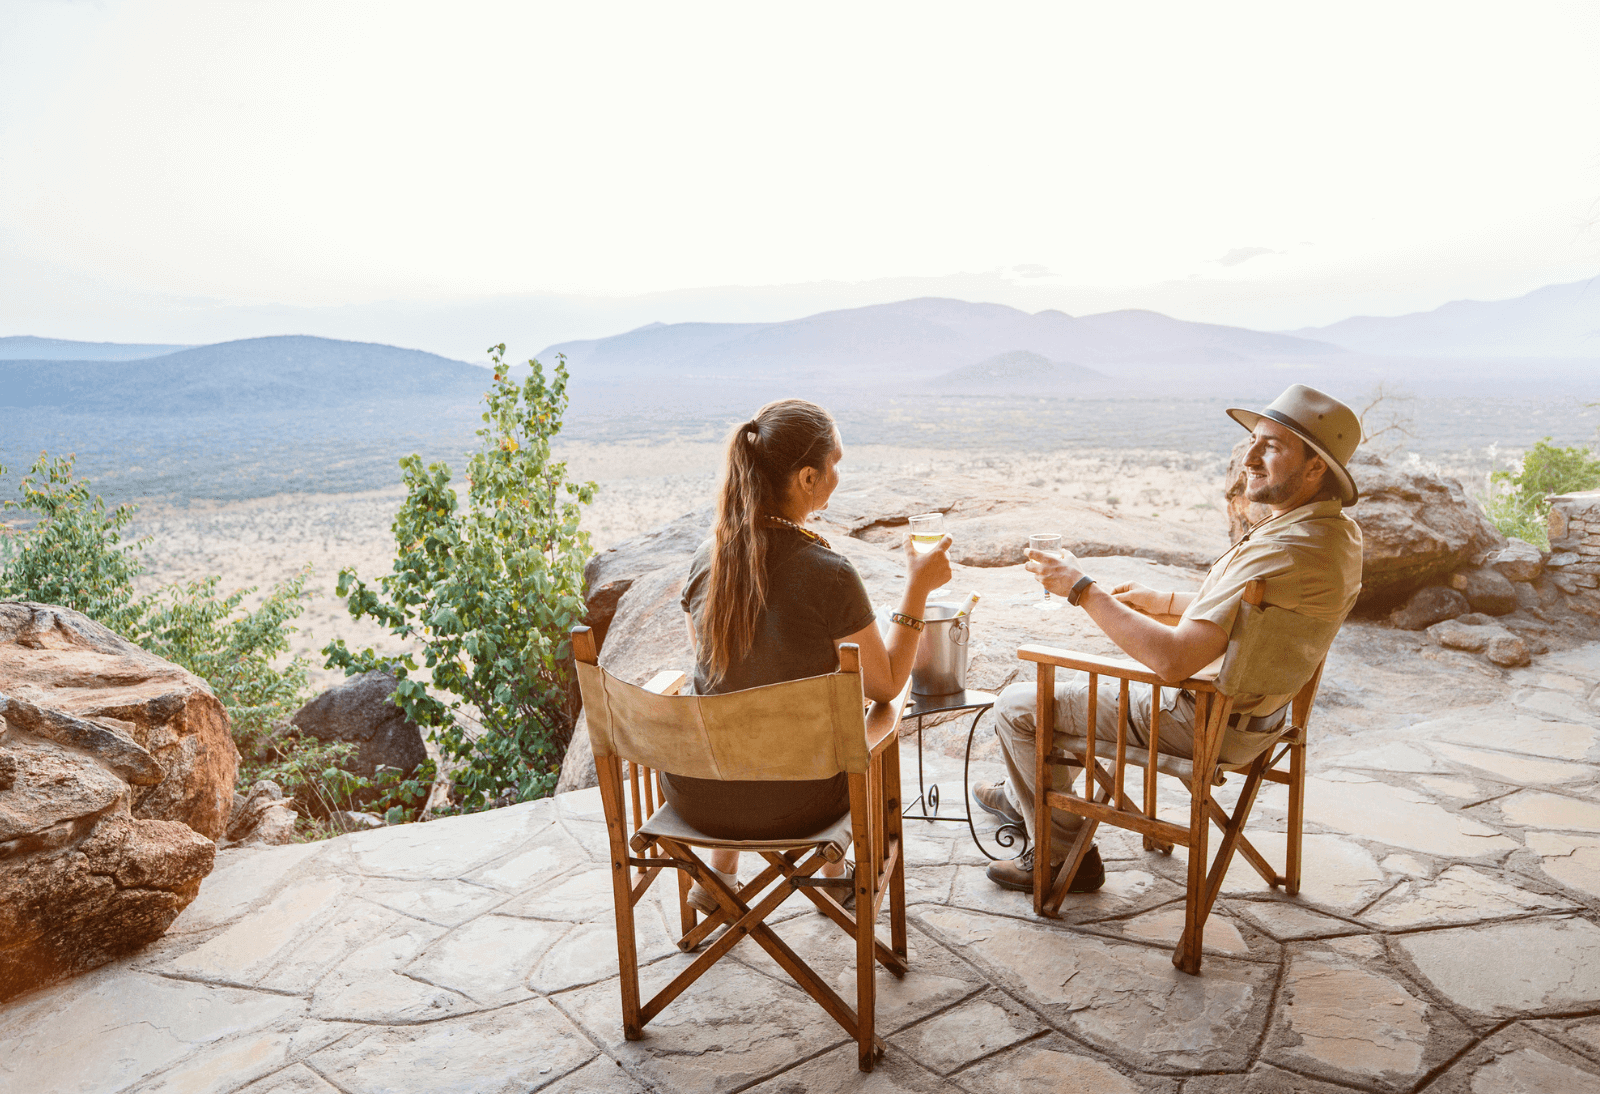 The Best Safari Hotel in 6 African Countries